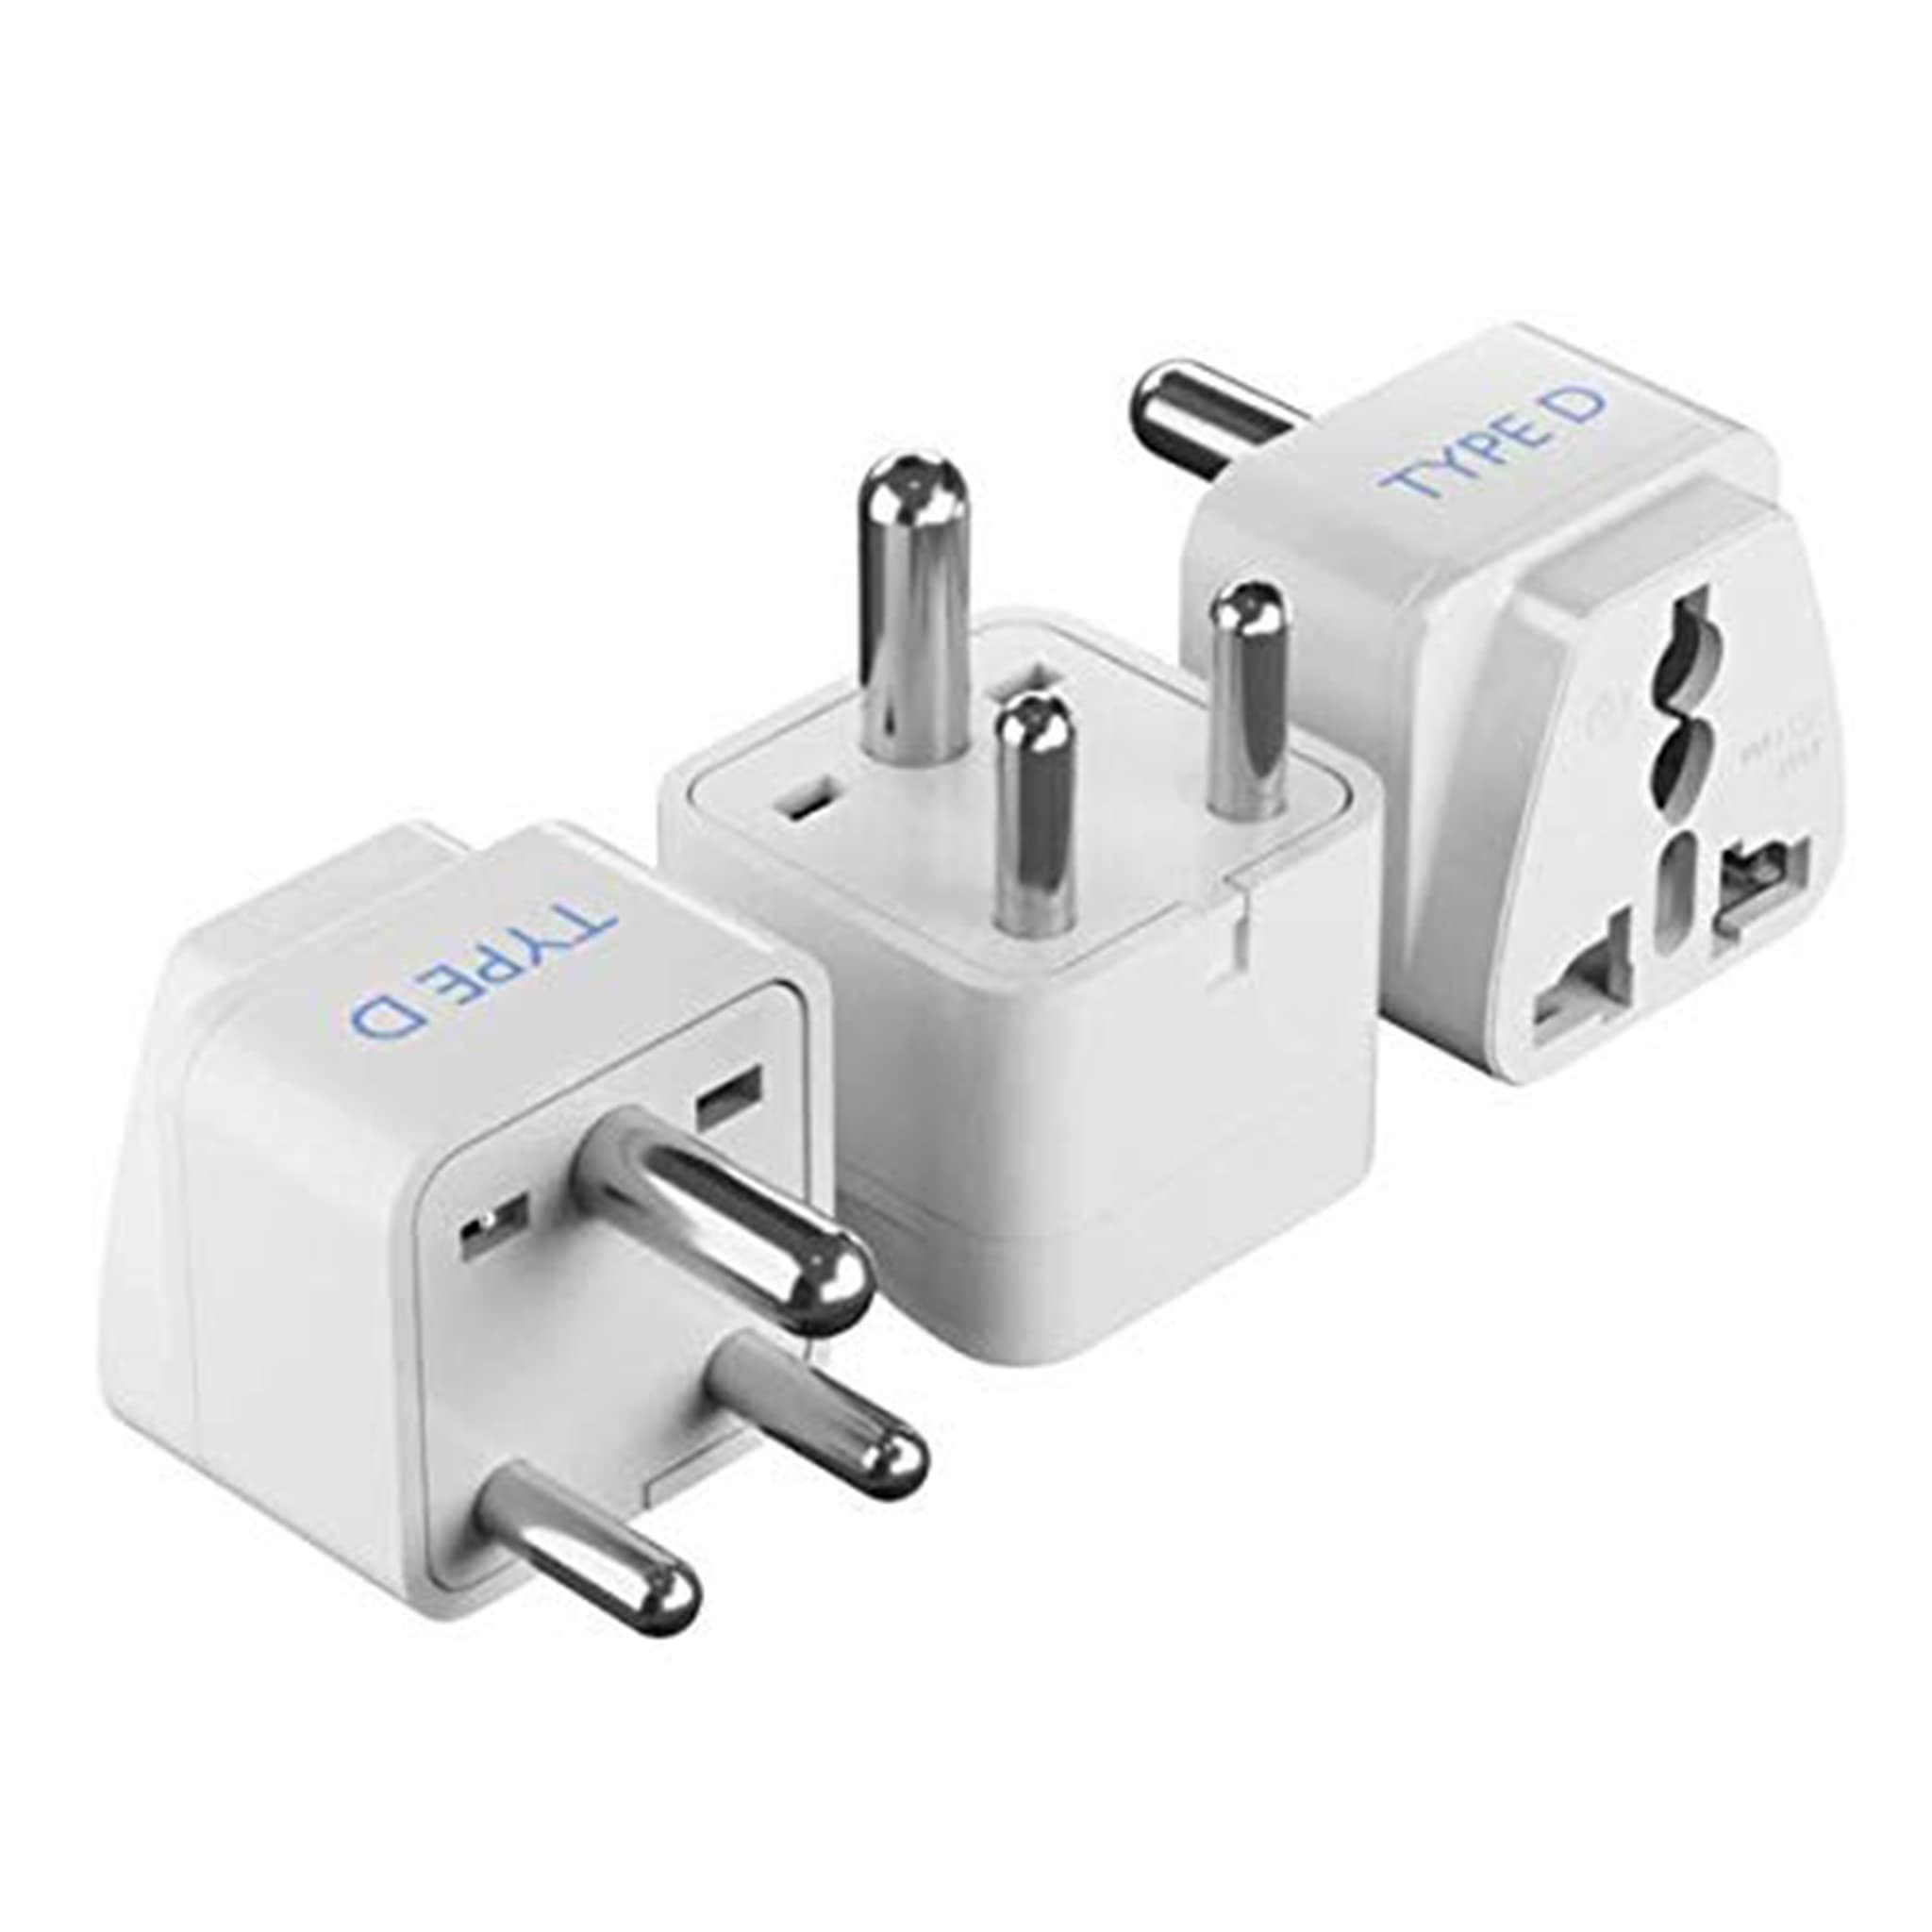 plug adapter for india